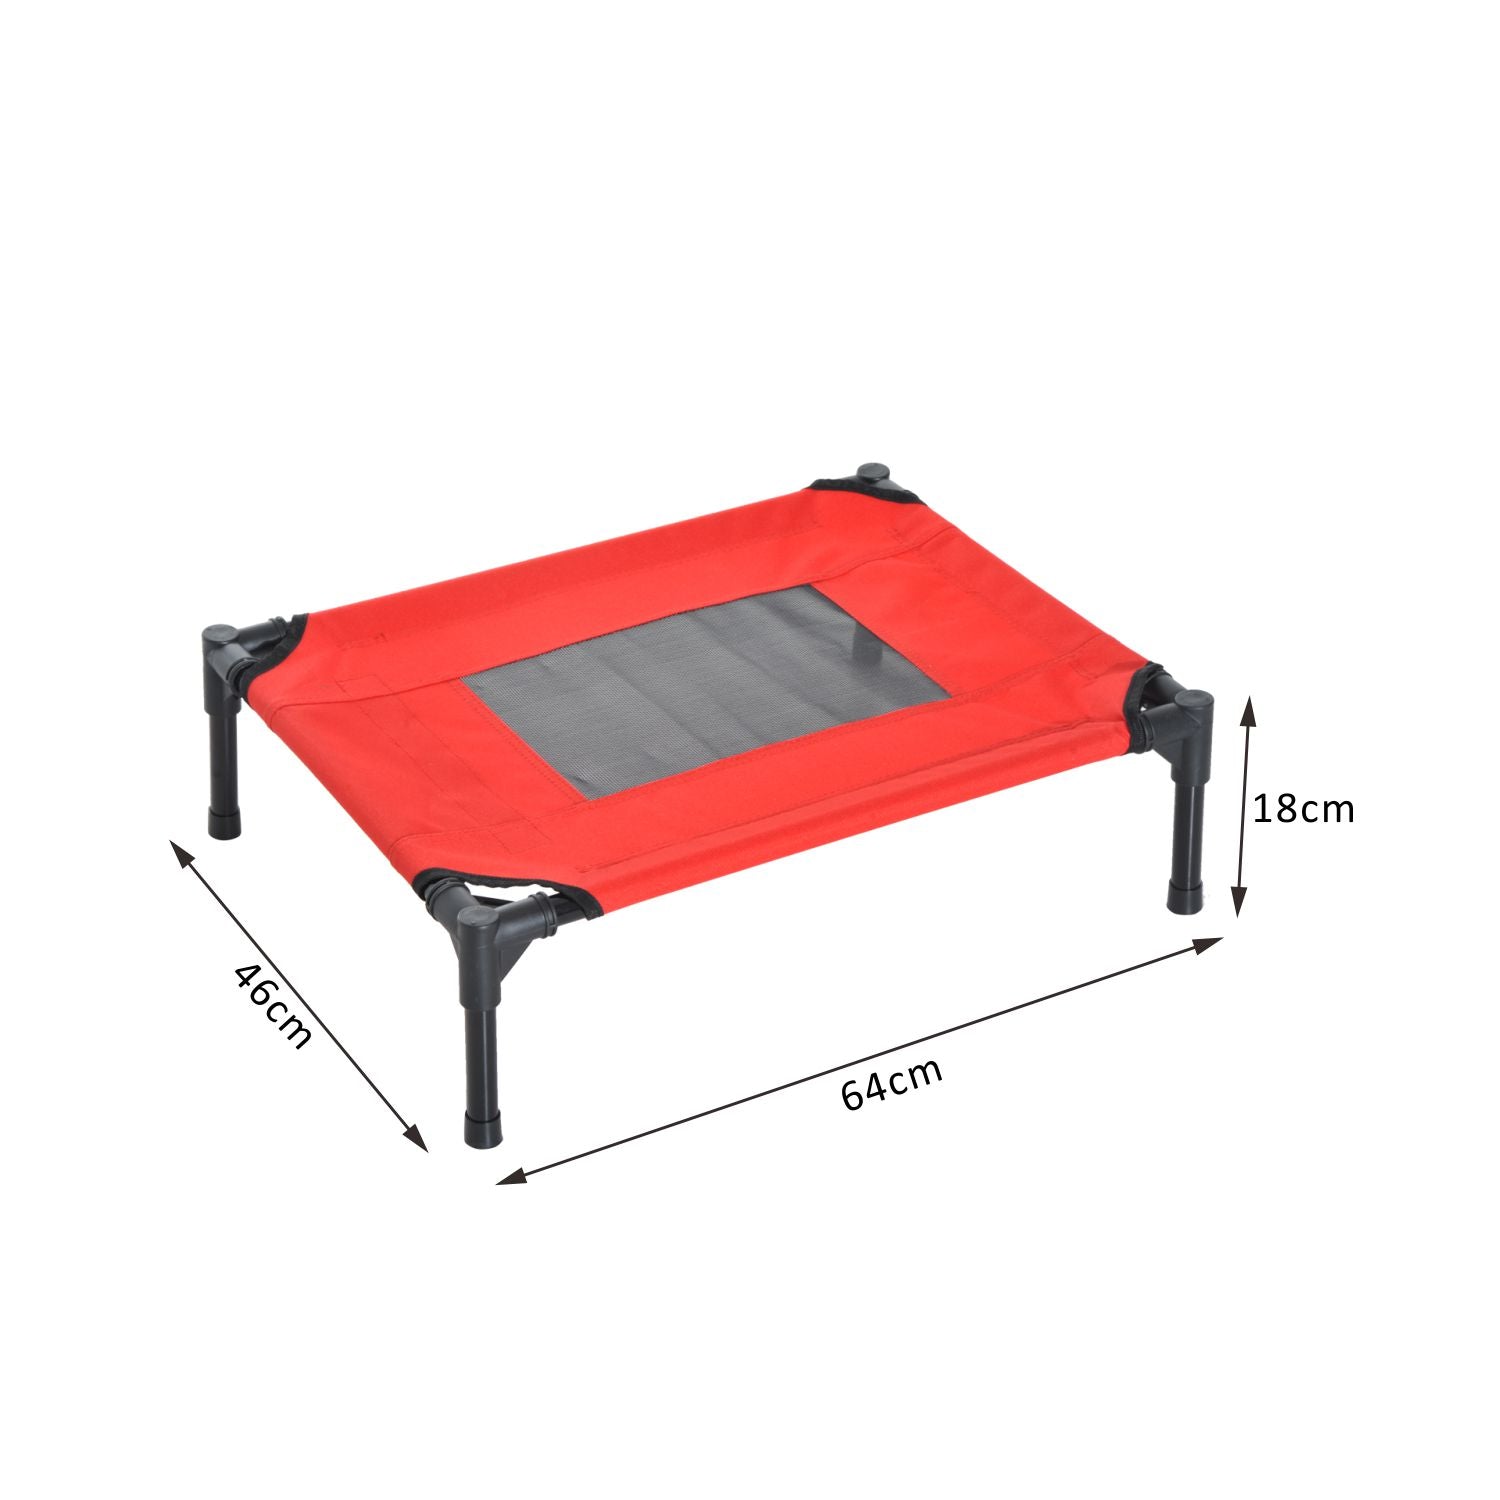 Elevated Pet Bed Portable Camping Raised Dog Bed w/ Metal Frame Black, Red (Small)